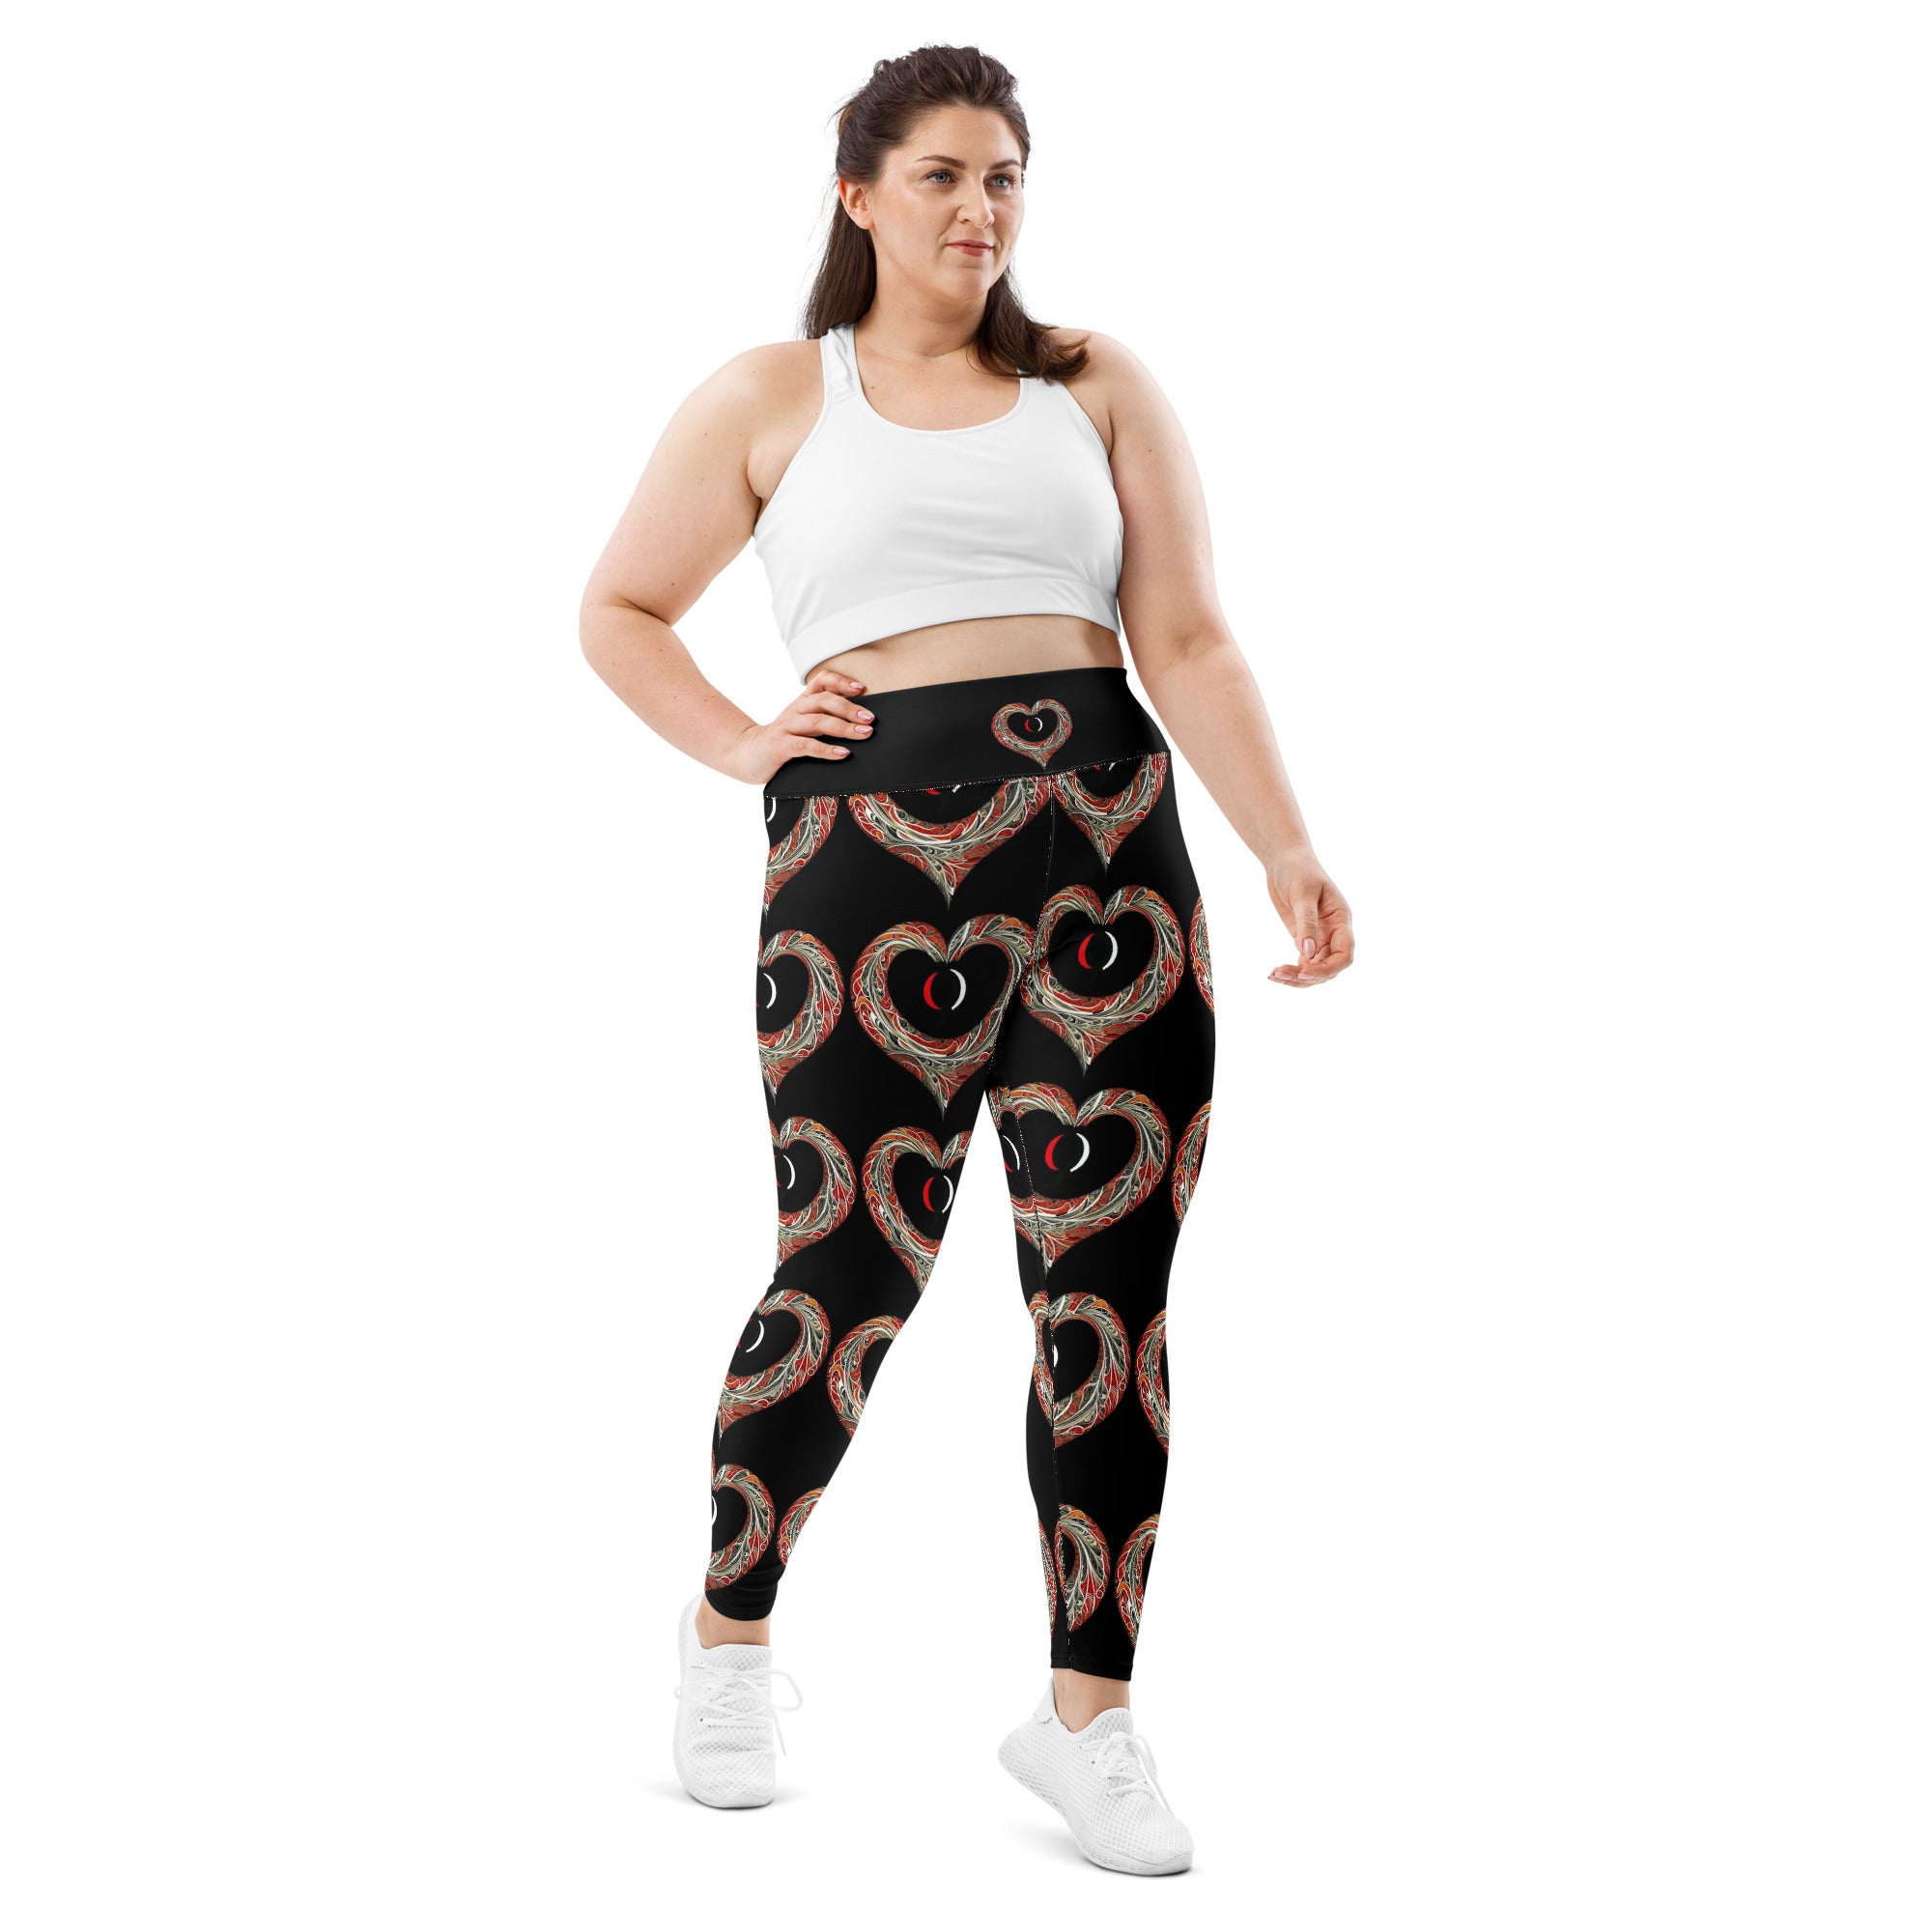 Red Snakeskin Pattern Plus Size Leggings - Free Shipping - - Projects817 LLC